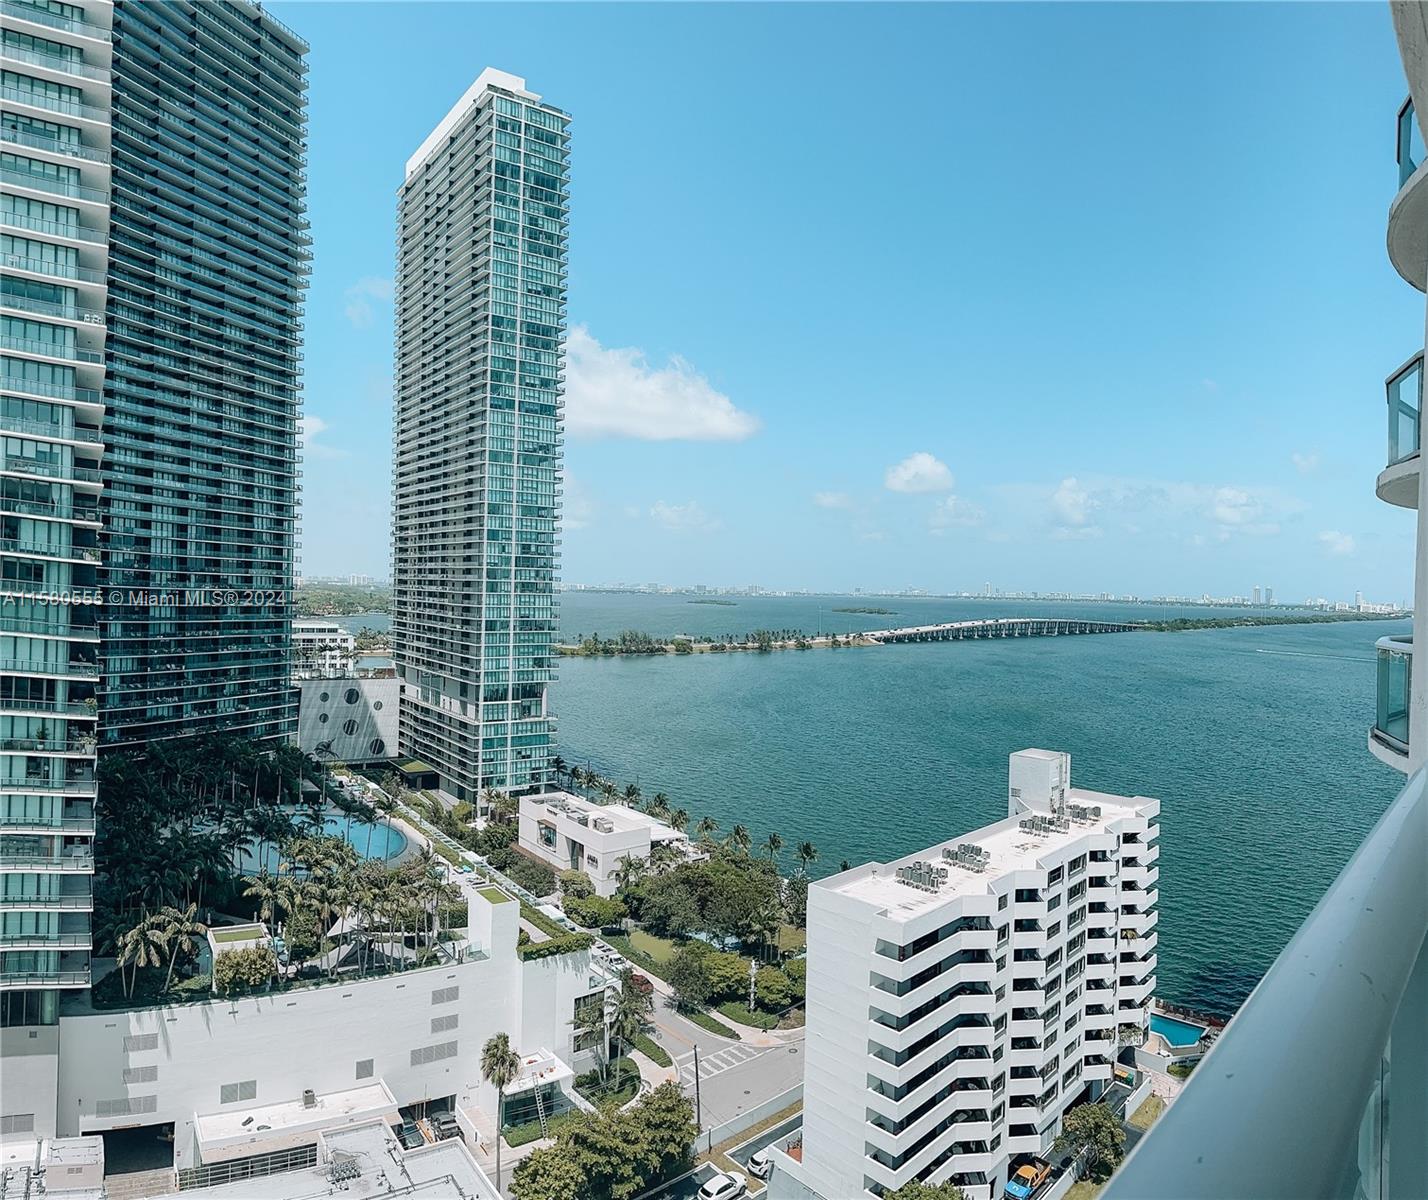 Experience luxury living in this beautifully designed condo for rent in the heart of Miami's Edgewater district. 

Step into your bright and spacious 1-bedroom, 2-bathroom unit, offering stunning views from the balcony. The condo features high-impact windows that flood the space with natural light. Enjoy cooking in the modern kitchen, equipped with stainless steel appliances and sleek cabinetry. The bedroom boasts a walk-in closet for ample storage, and the entire unit has been recently painted with new blinds installed.

The building's amenities include a fitness center, pool, jacuzzi, steam room, and sauna—perfect for relaxation and wellness. Don't miss this opportunity to live in one of Miami's most desirable locations with all the amenities and convenience you could want.